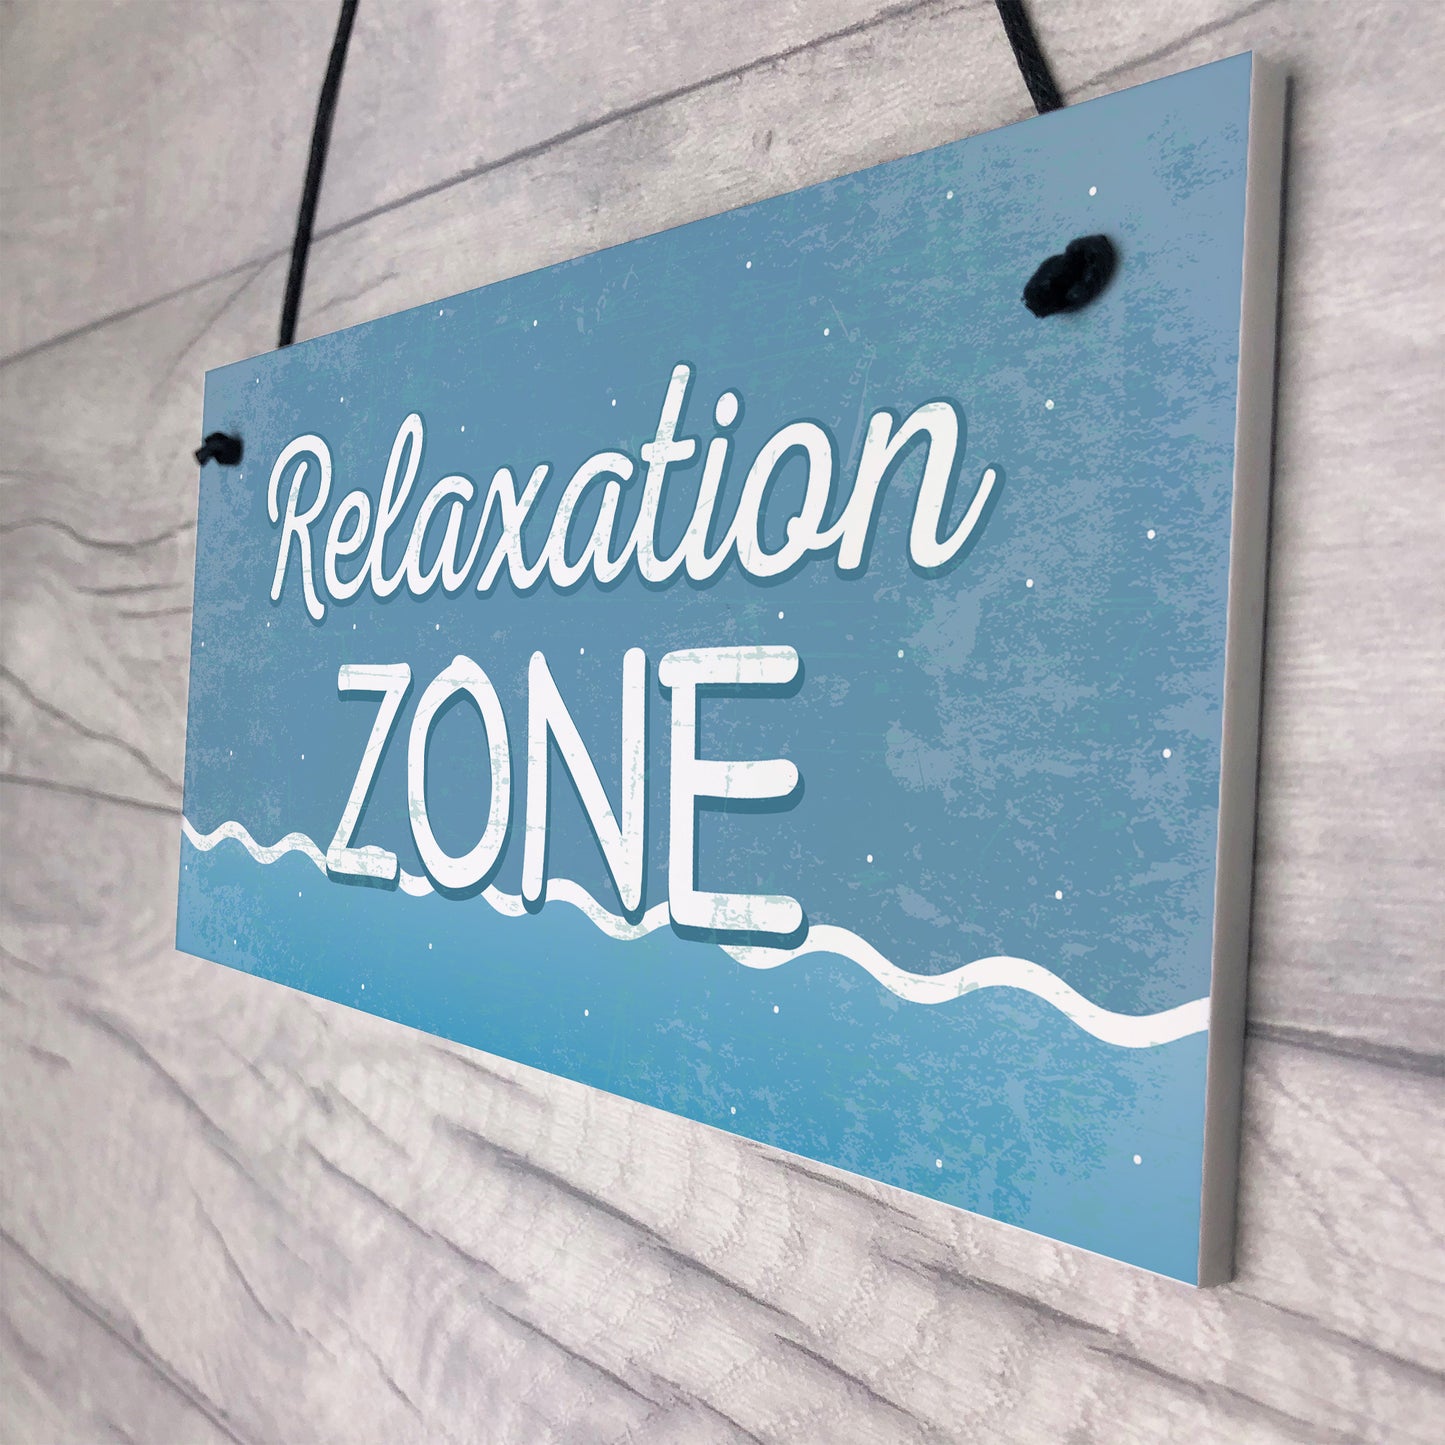 Relaxation Zone Hot Tub Man Cave Bathroom Garden Plaque Sign